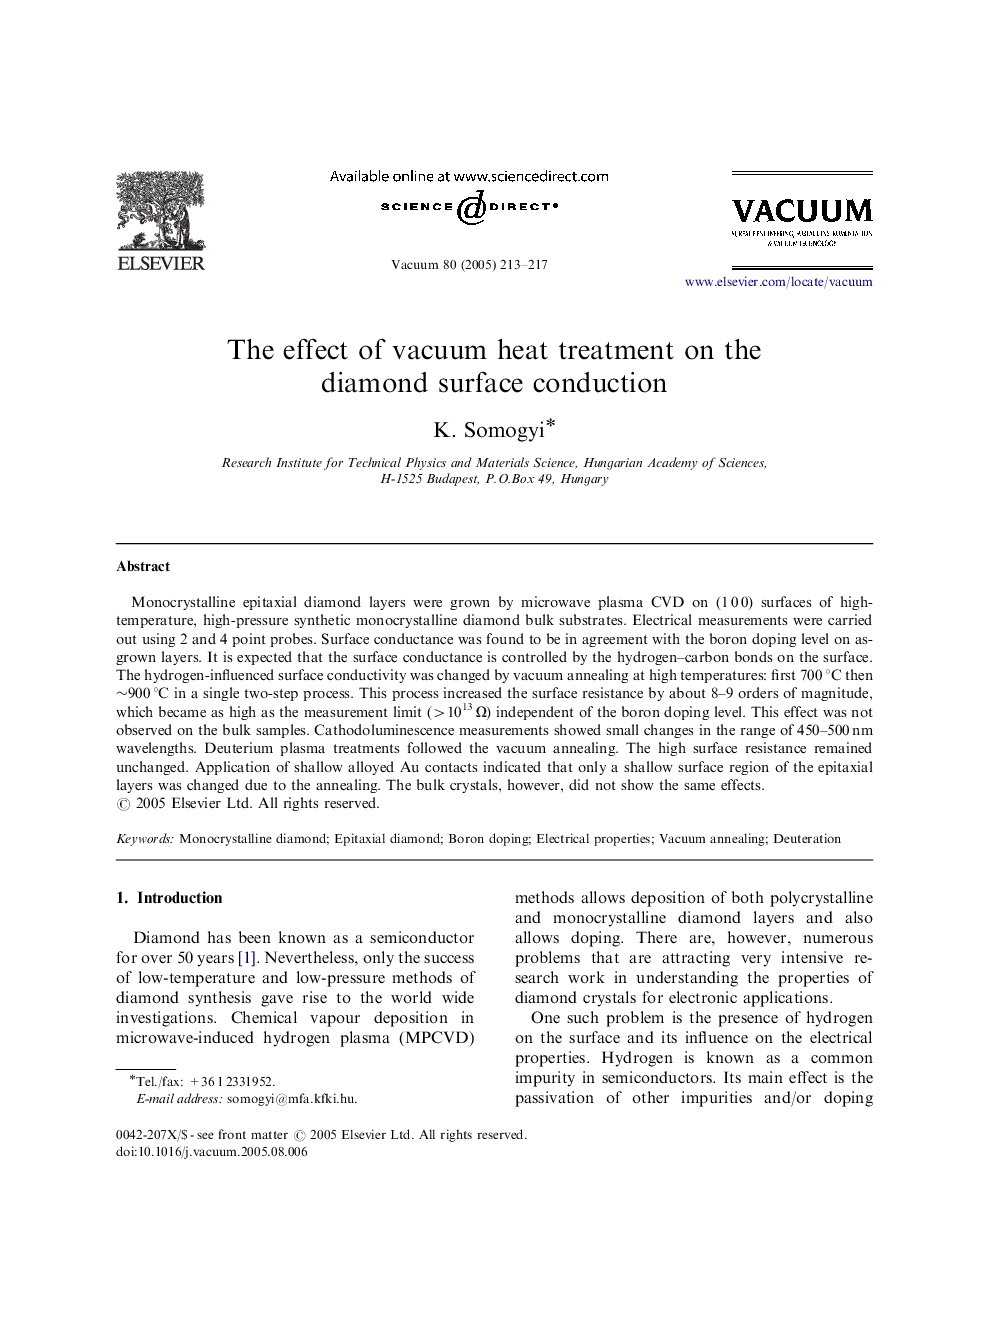 The effect of vacuum heat treatment on the diamond surface conduction